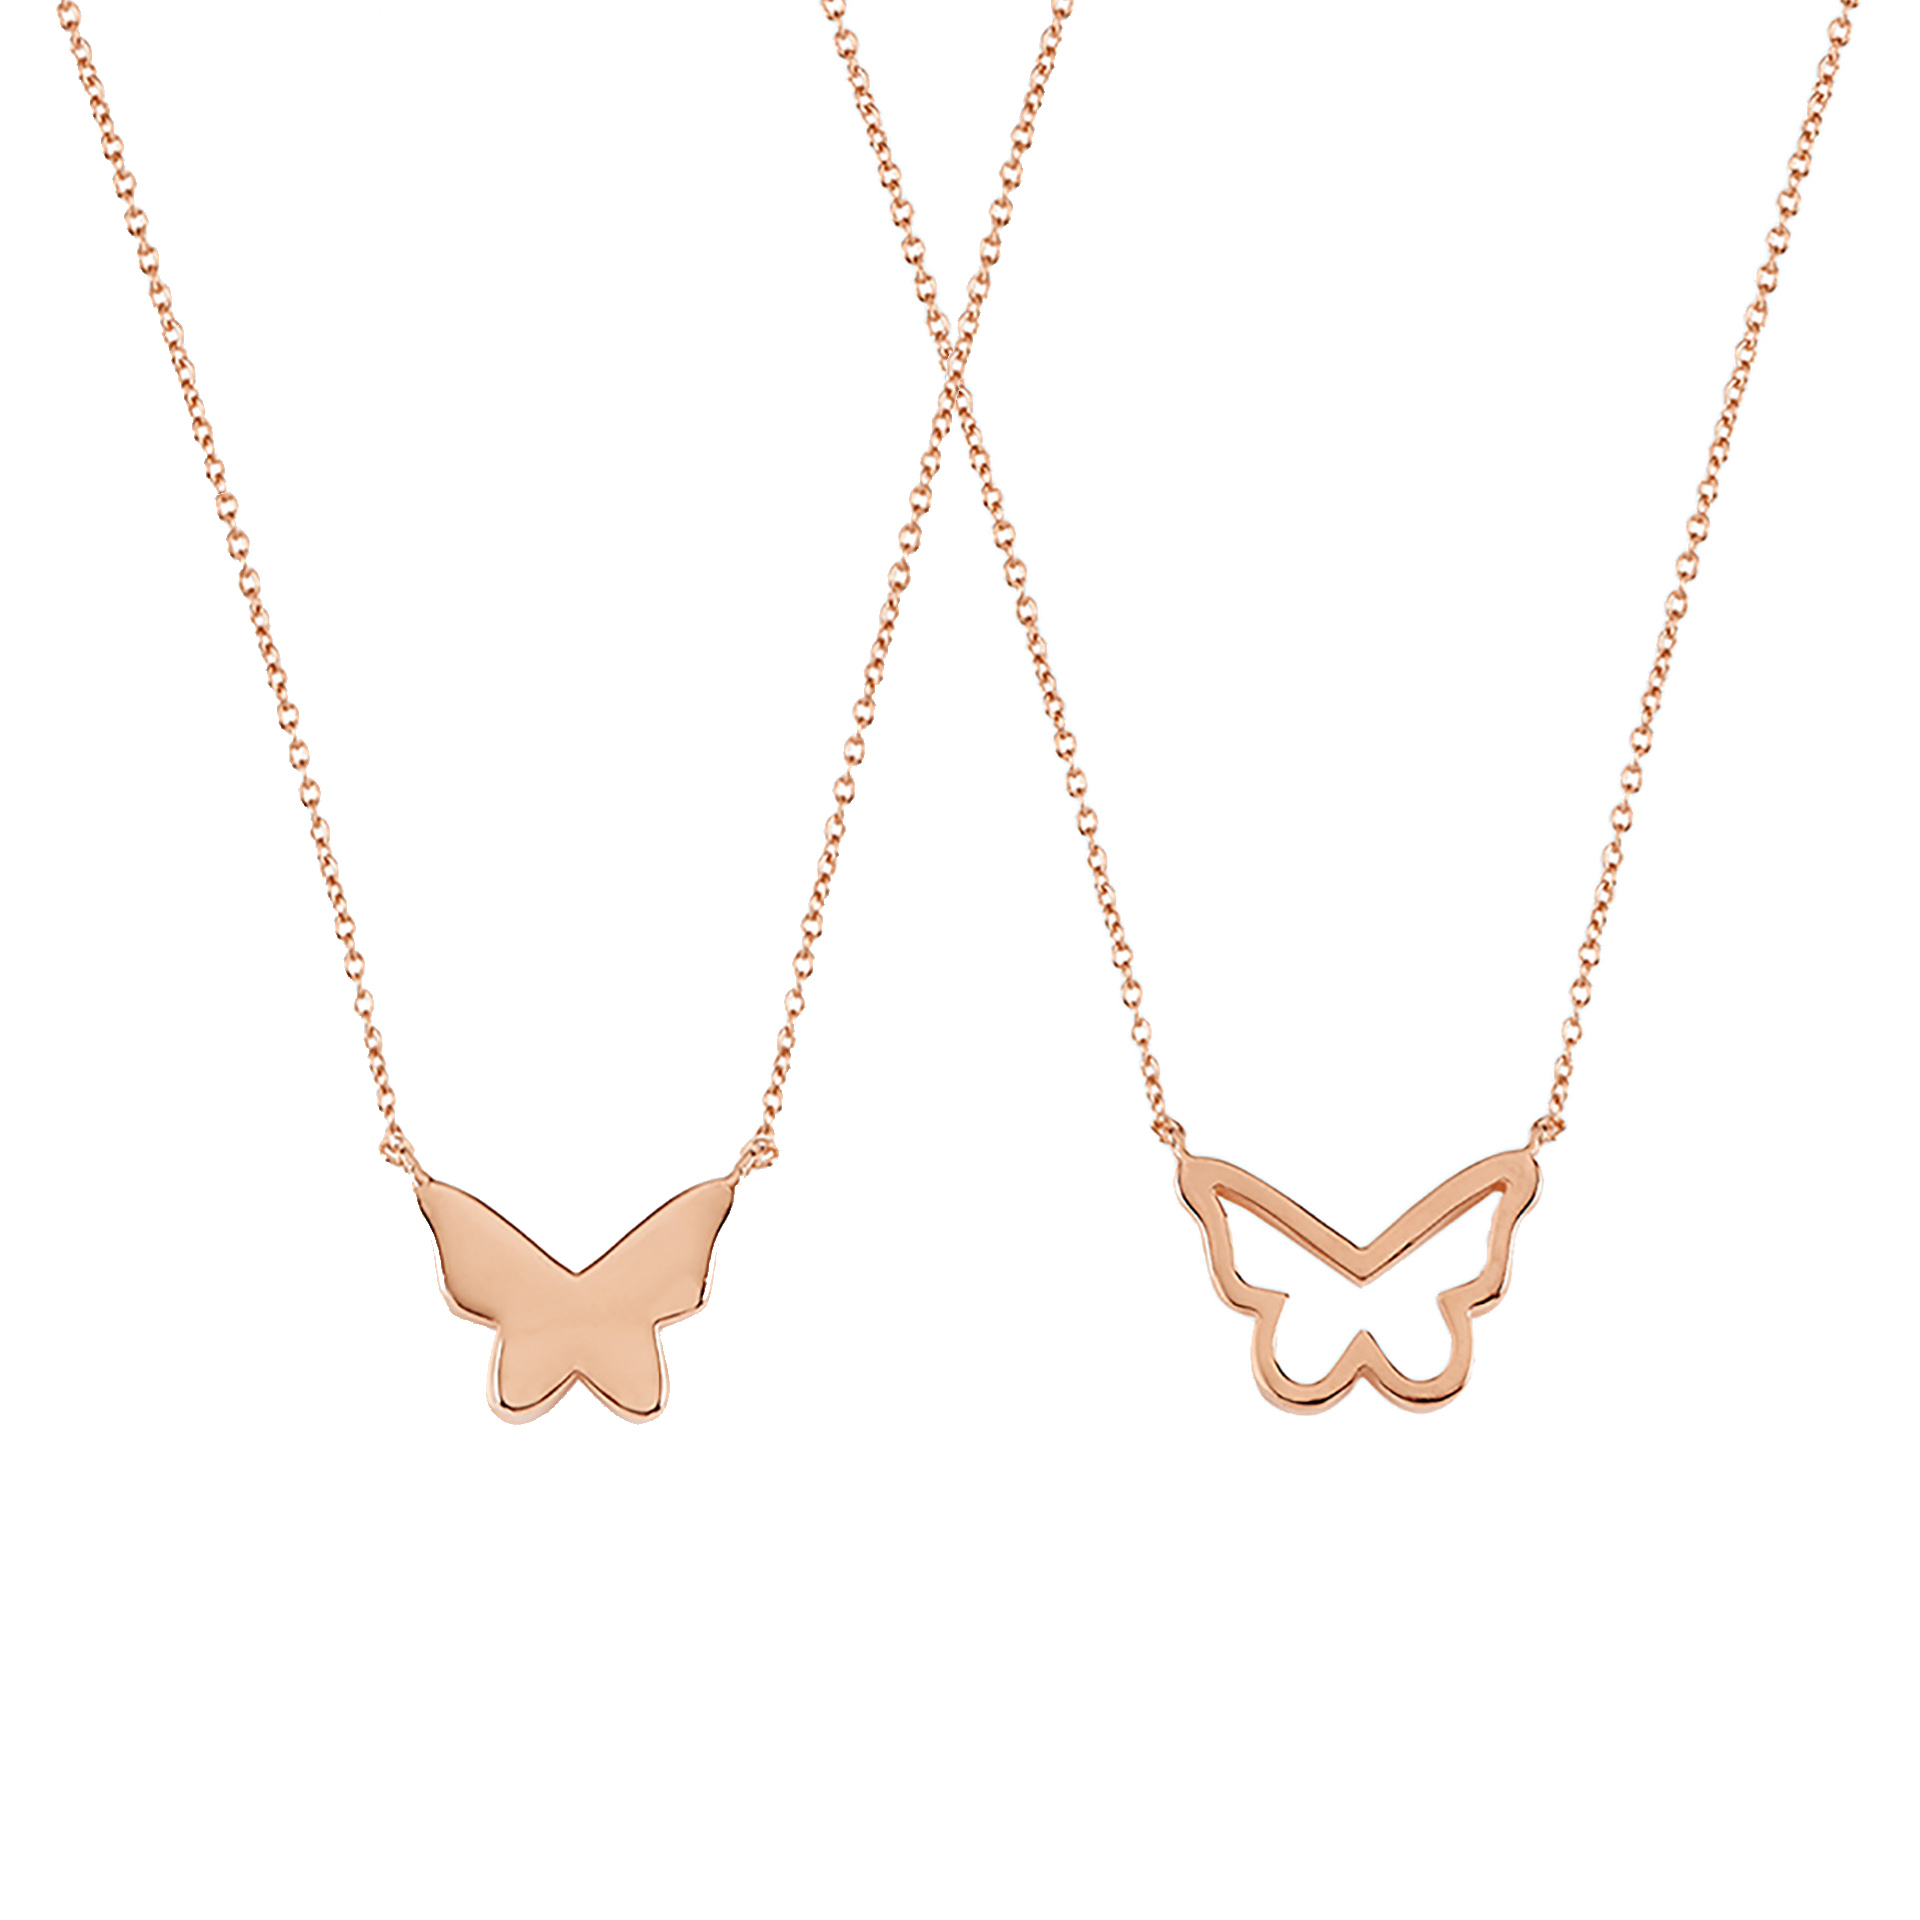 Marc Jacobs | Jewelry | Heaven By Marc Jacobs Friendship Necklace Set |  Poshmark